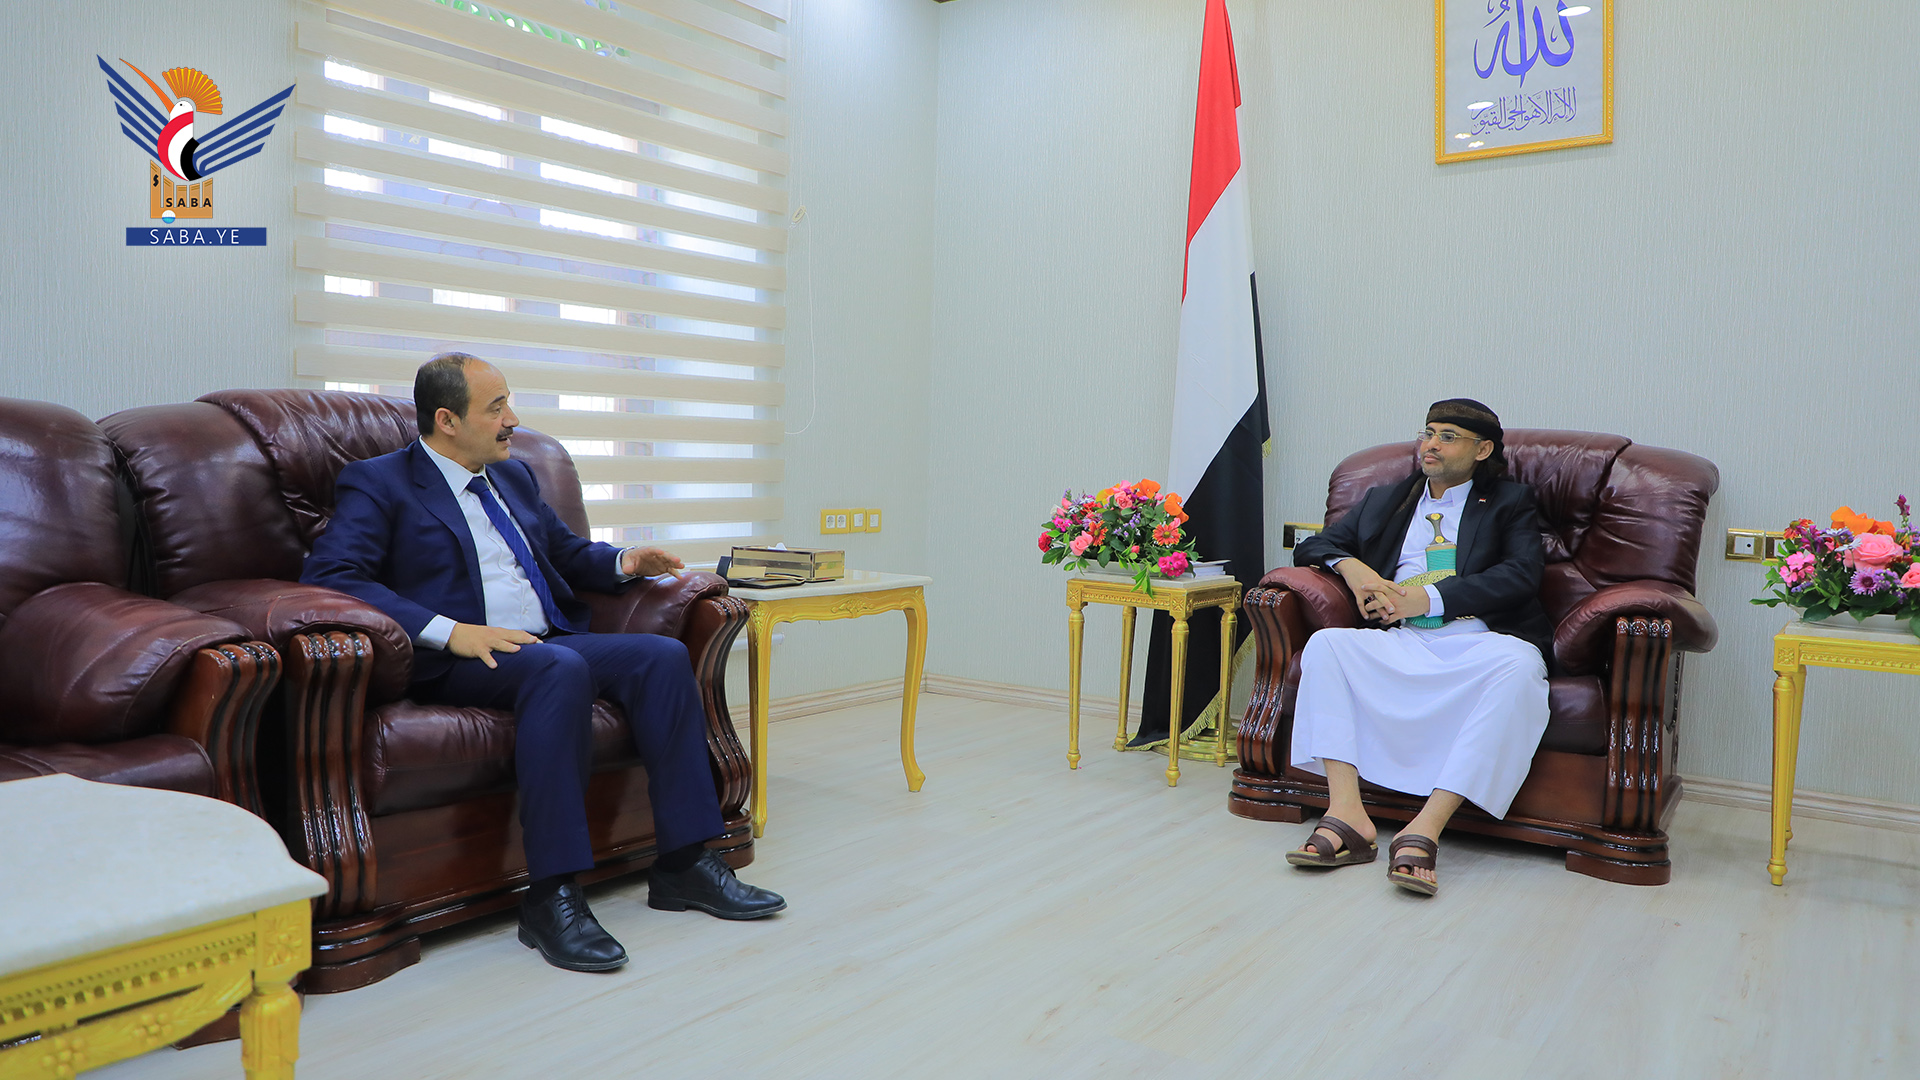 President Al-Mashat stresses need to develop performance of works offices